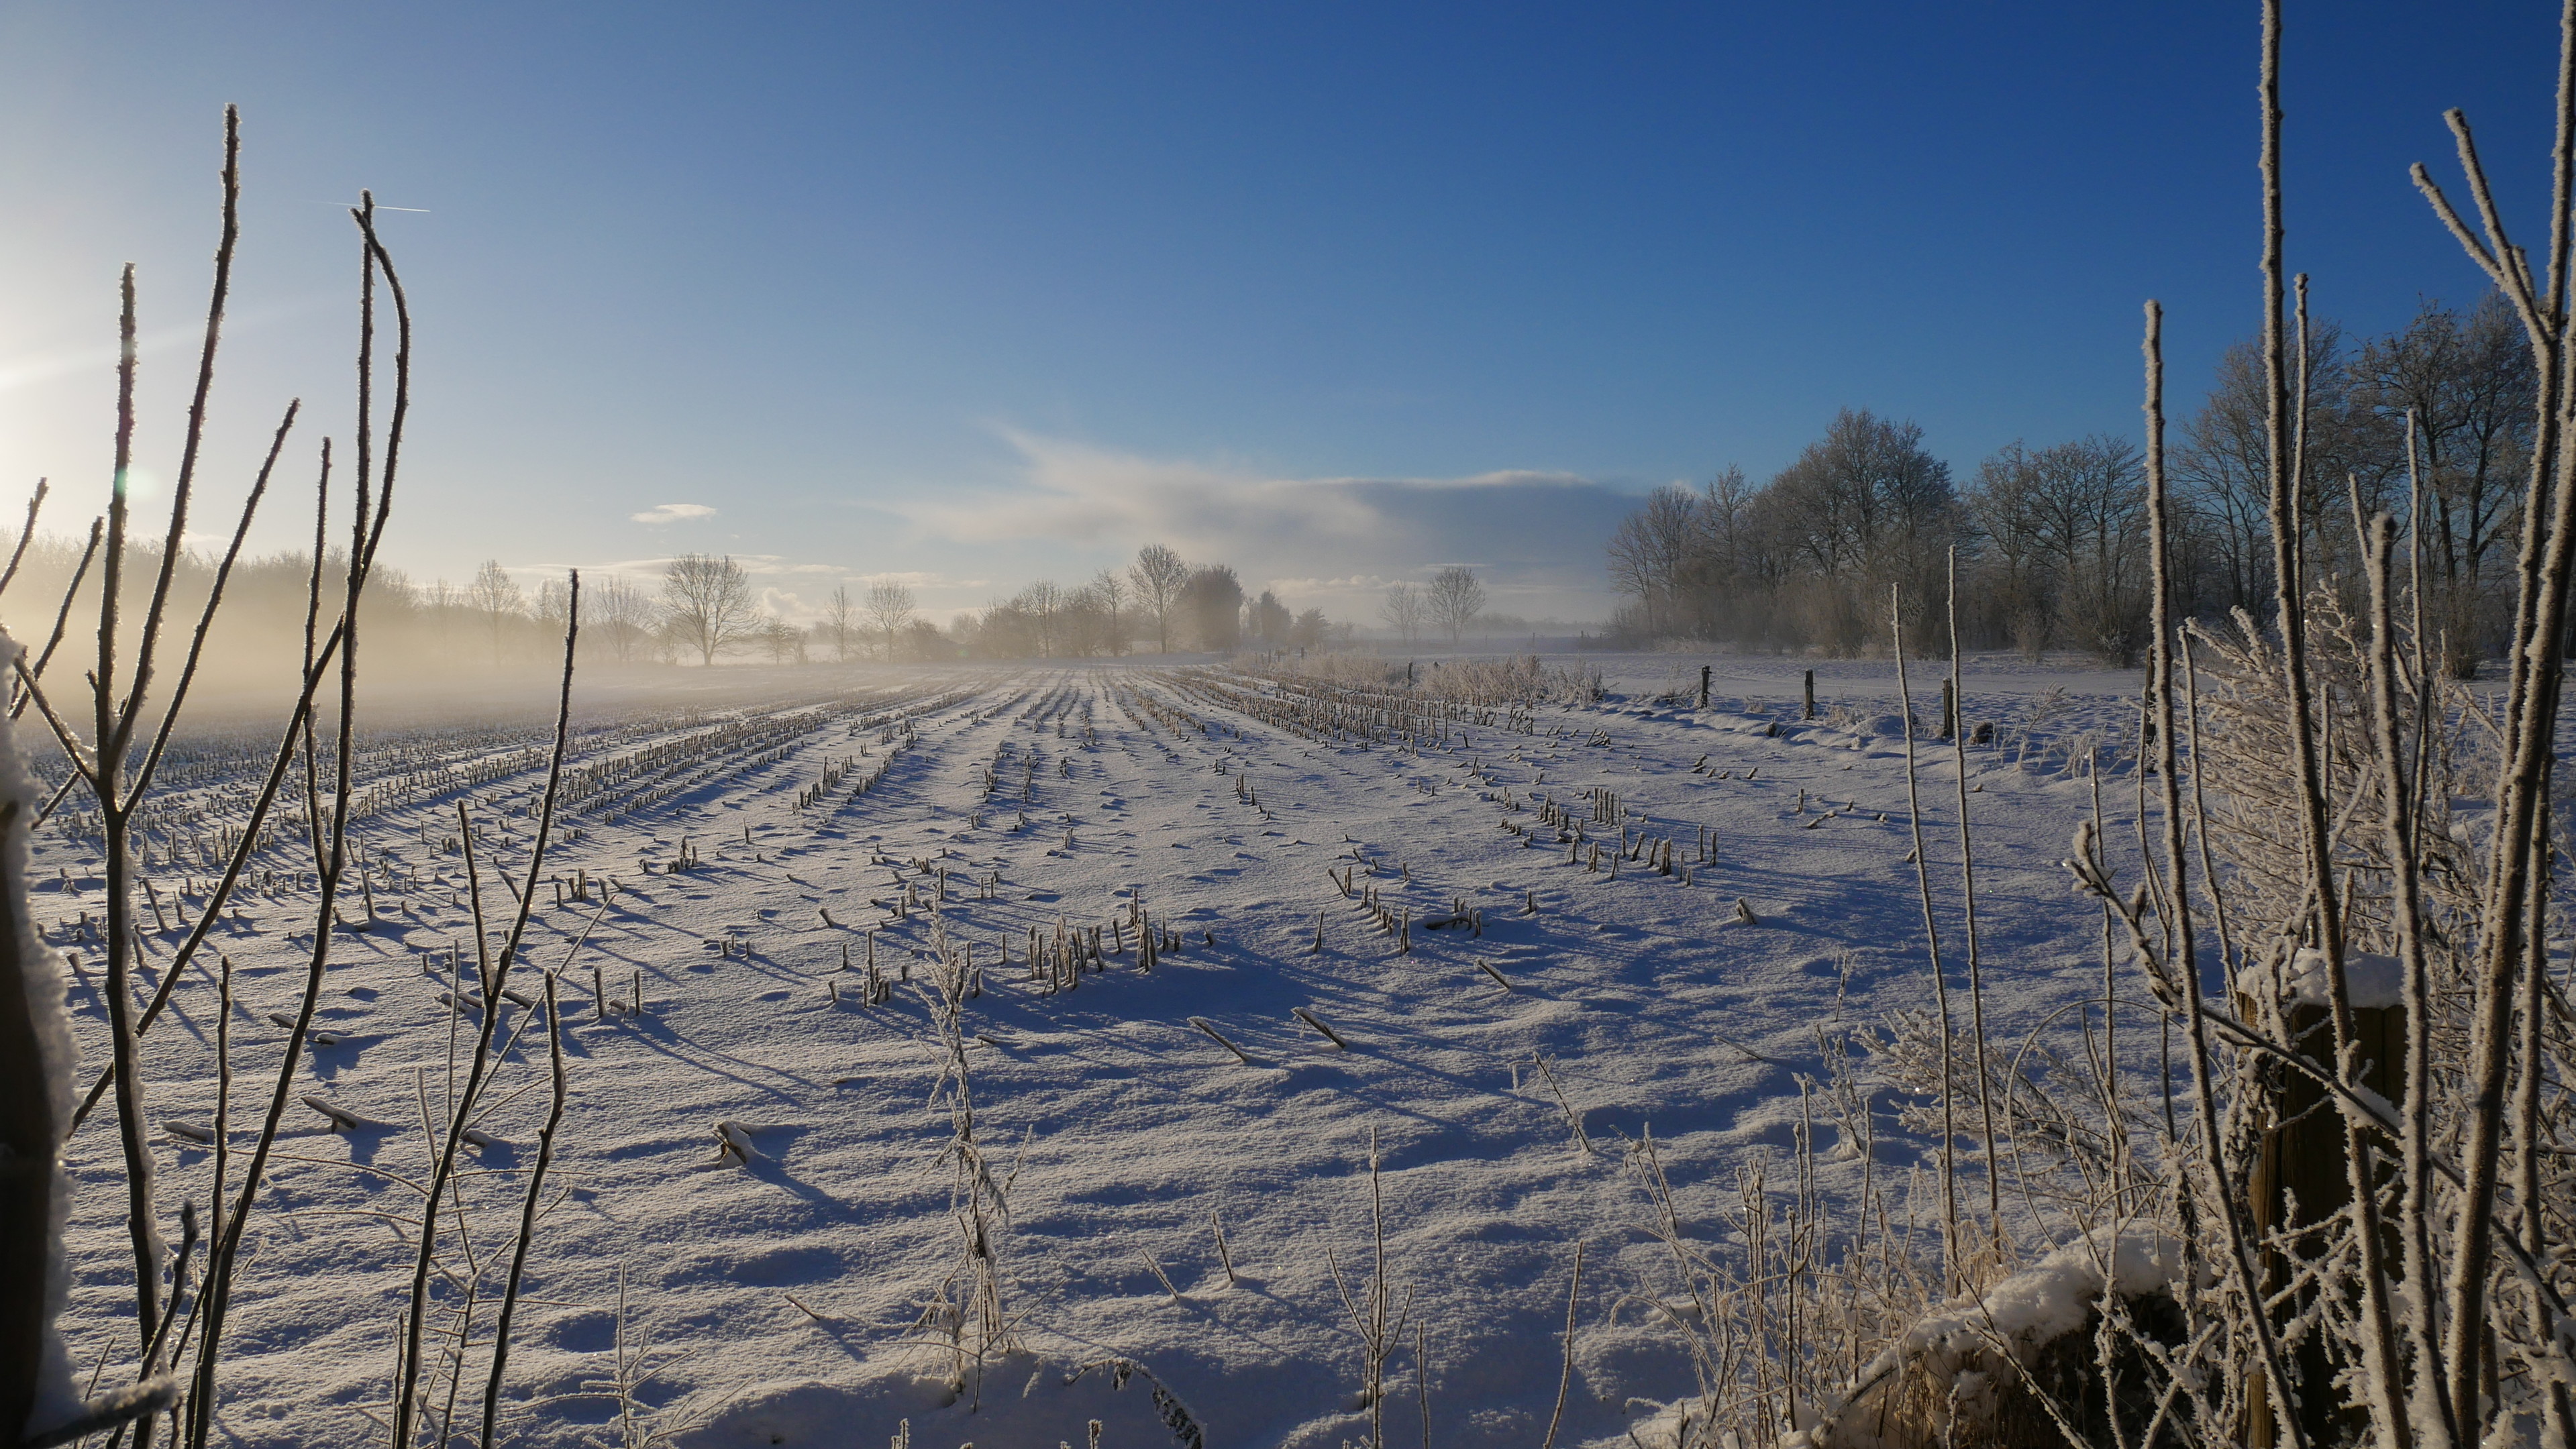 radiant blue sky with a a field covered in snow in foreground